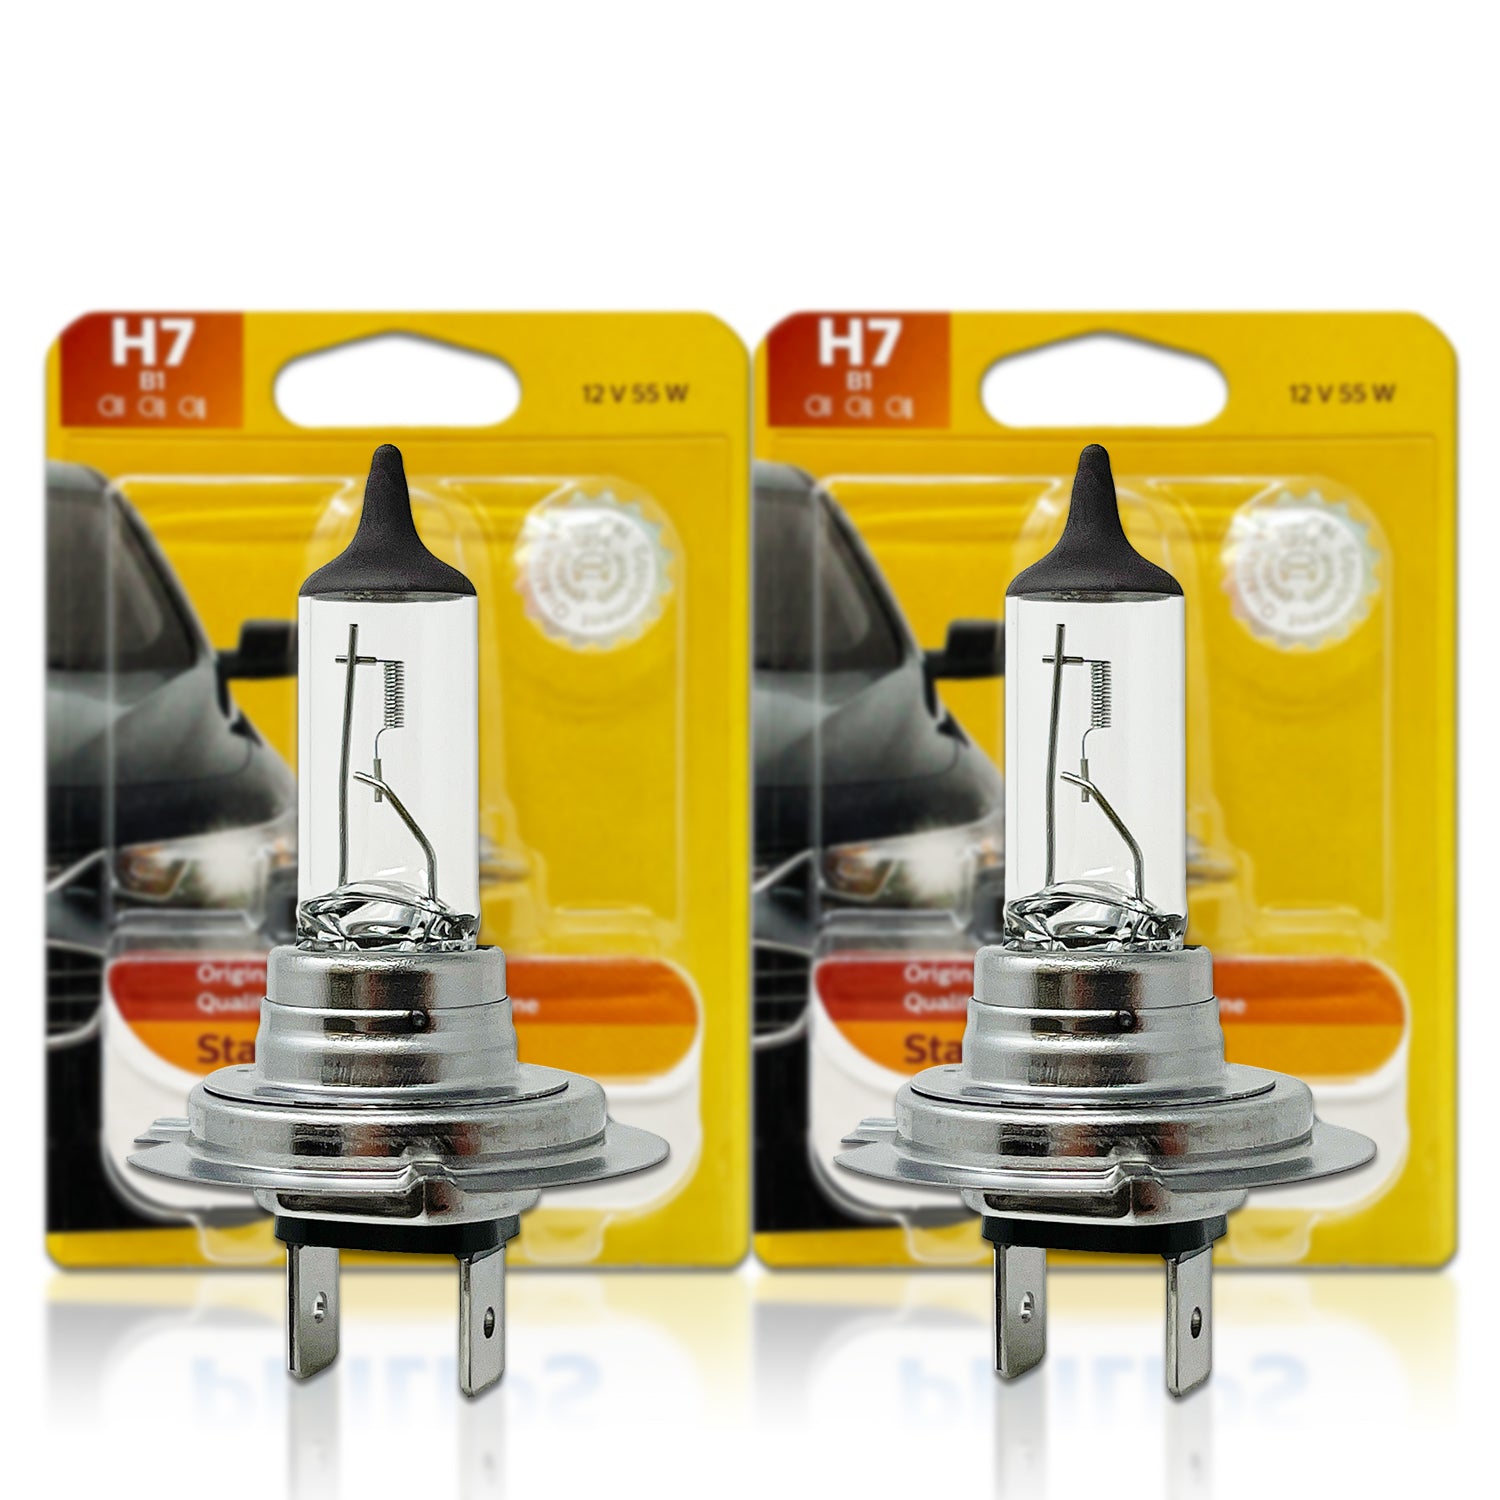 How to choose H7 high/low beam replacement bulbs (3100K to 4000K